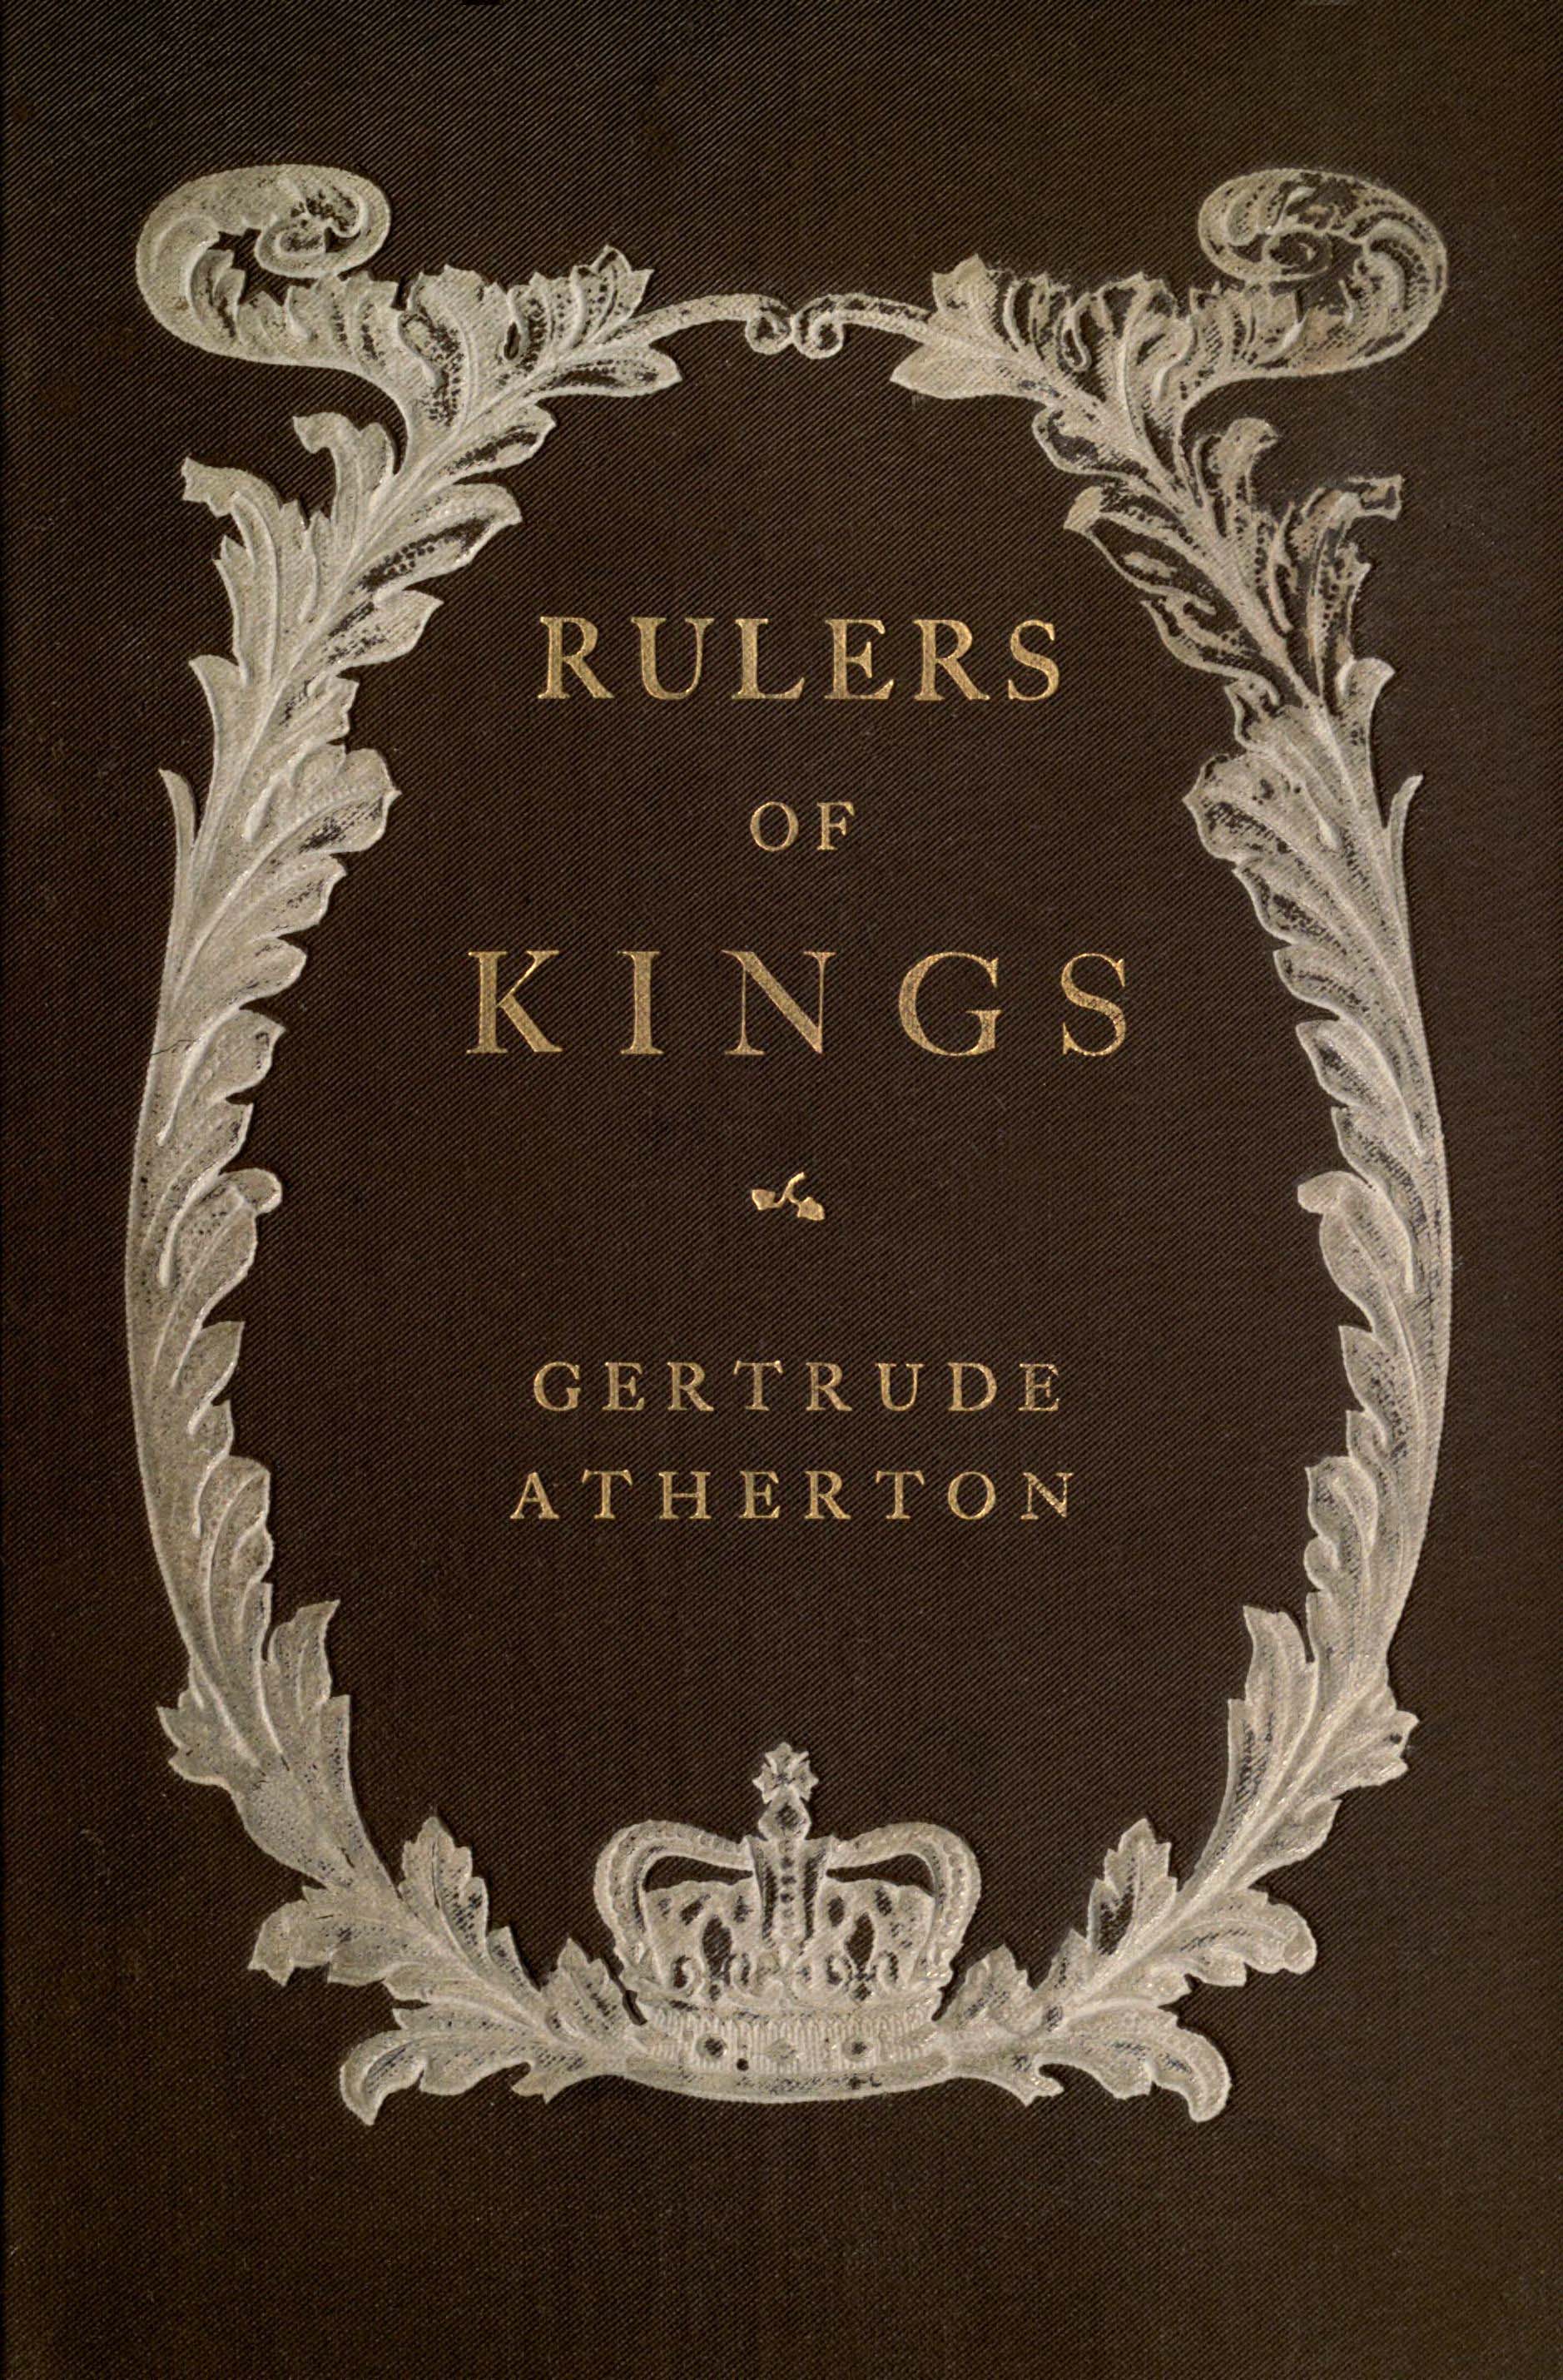 Rulers of kings, by Gertrude Atherton—A Project Gutenberg eBook pic